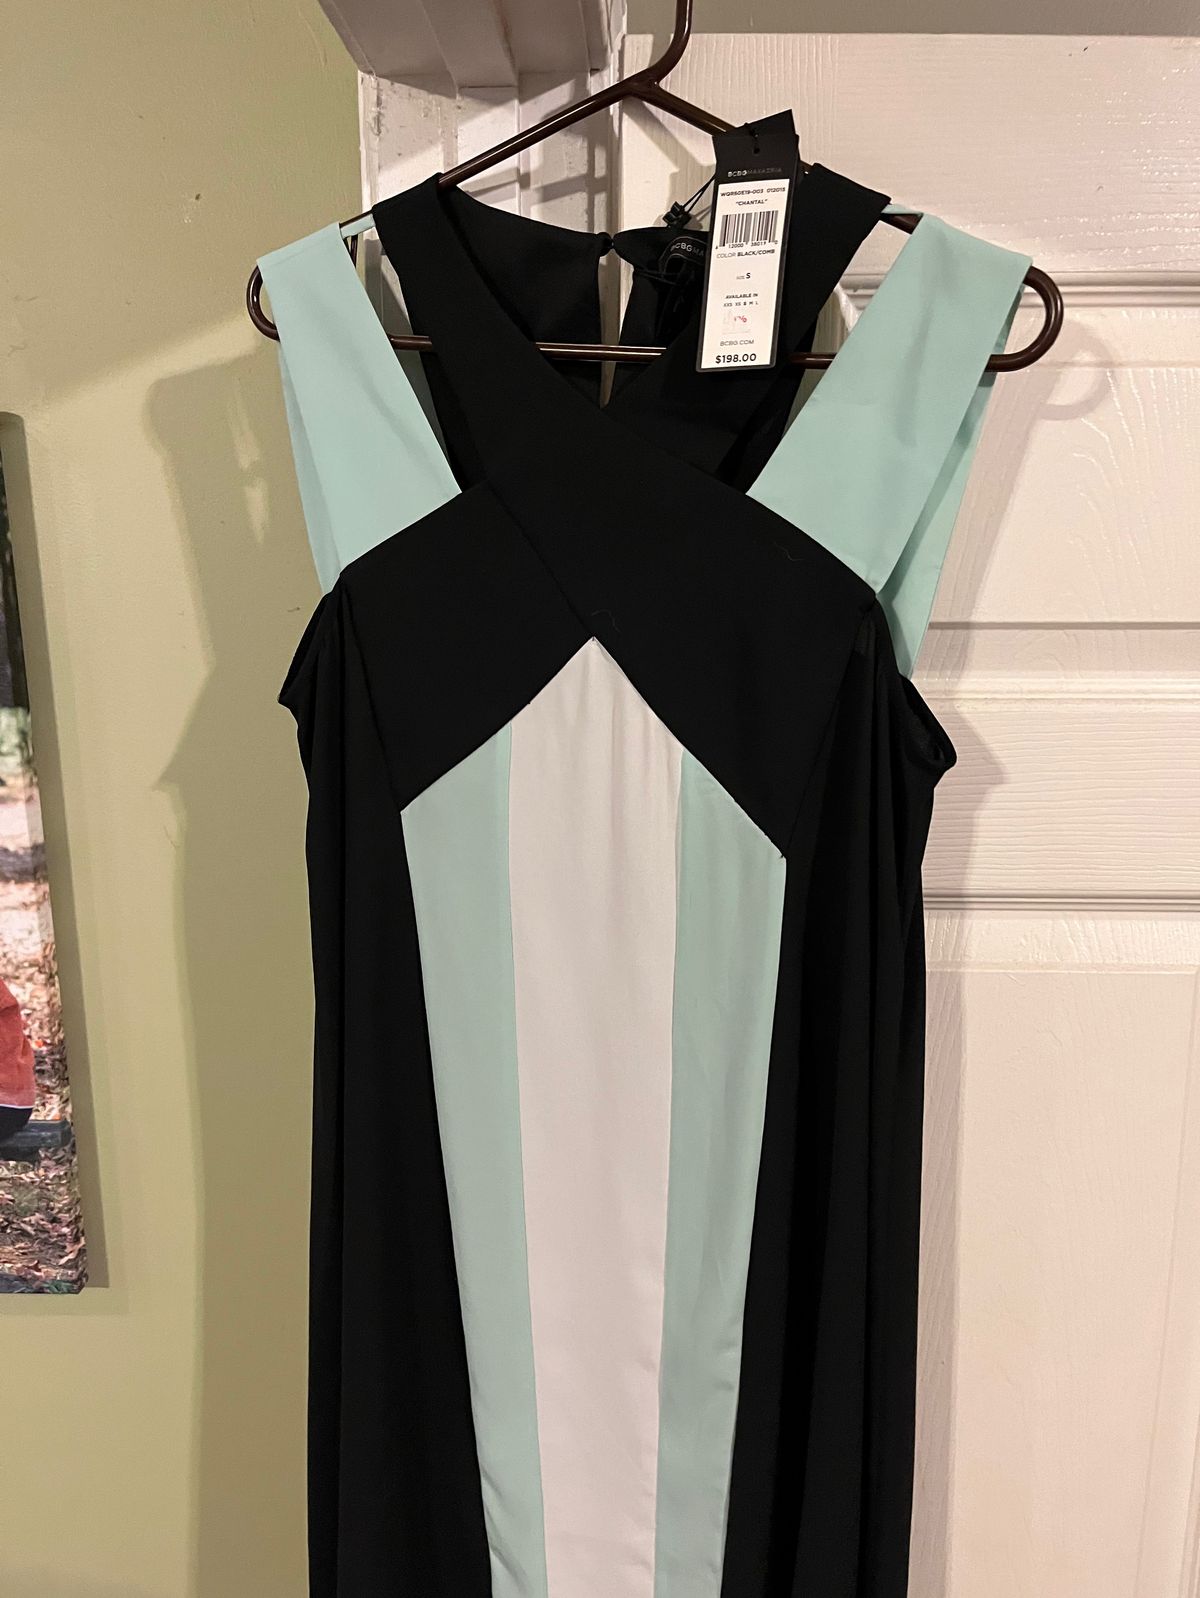 Style Chantal BCBG Size S Nightclub High Neck Turquoise Black Cocktail Dress on Queenly